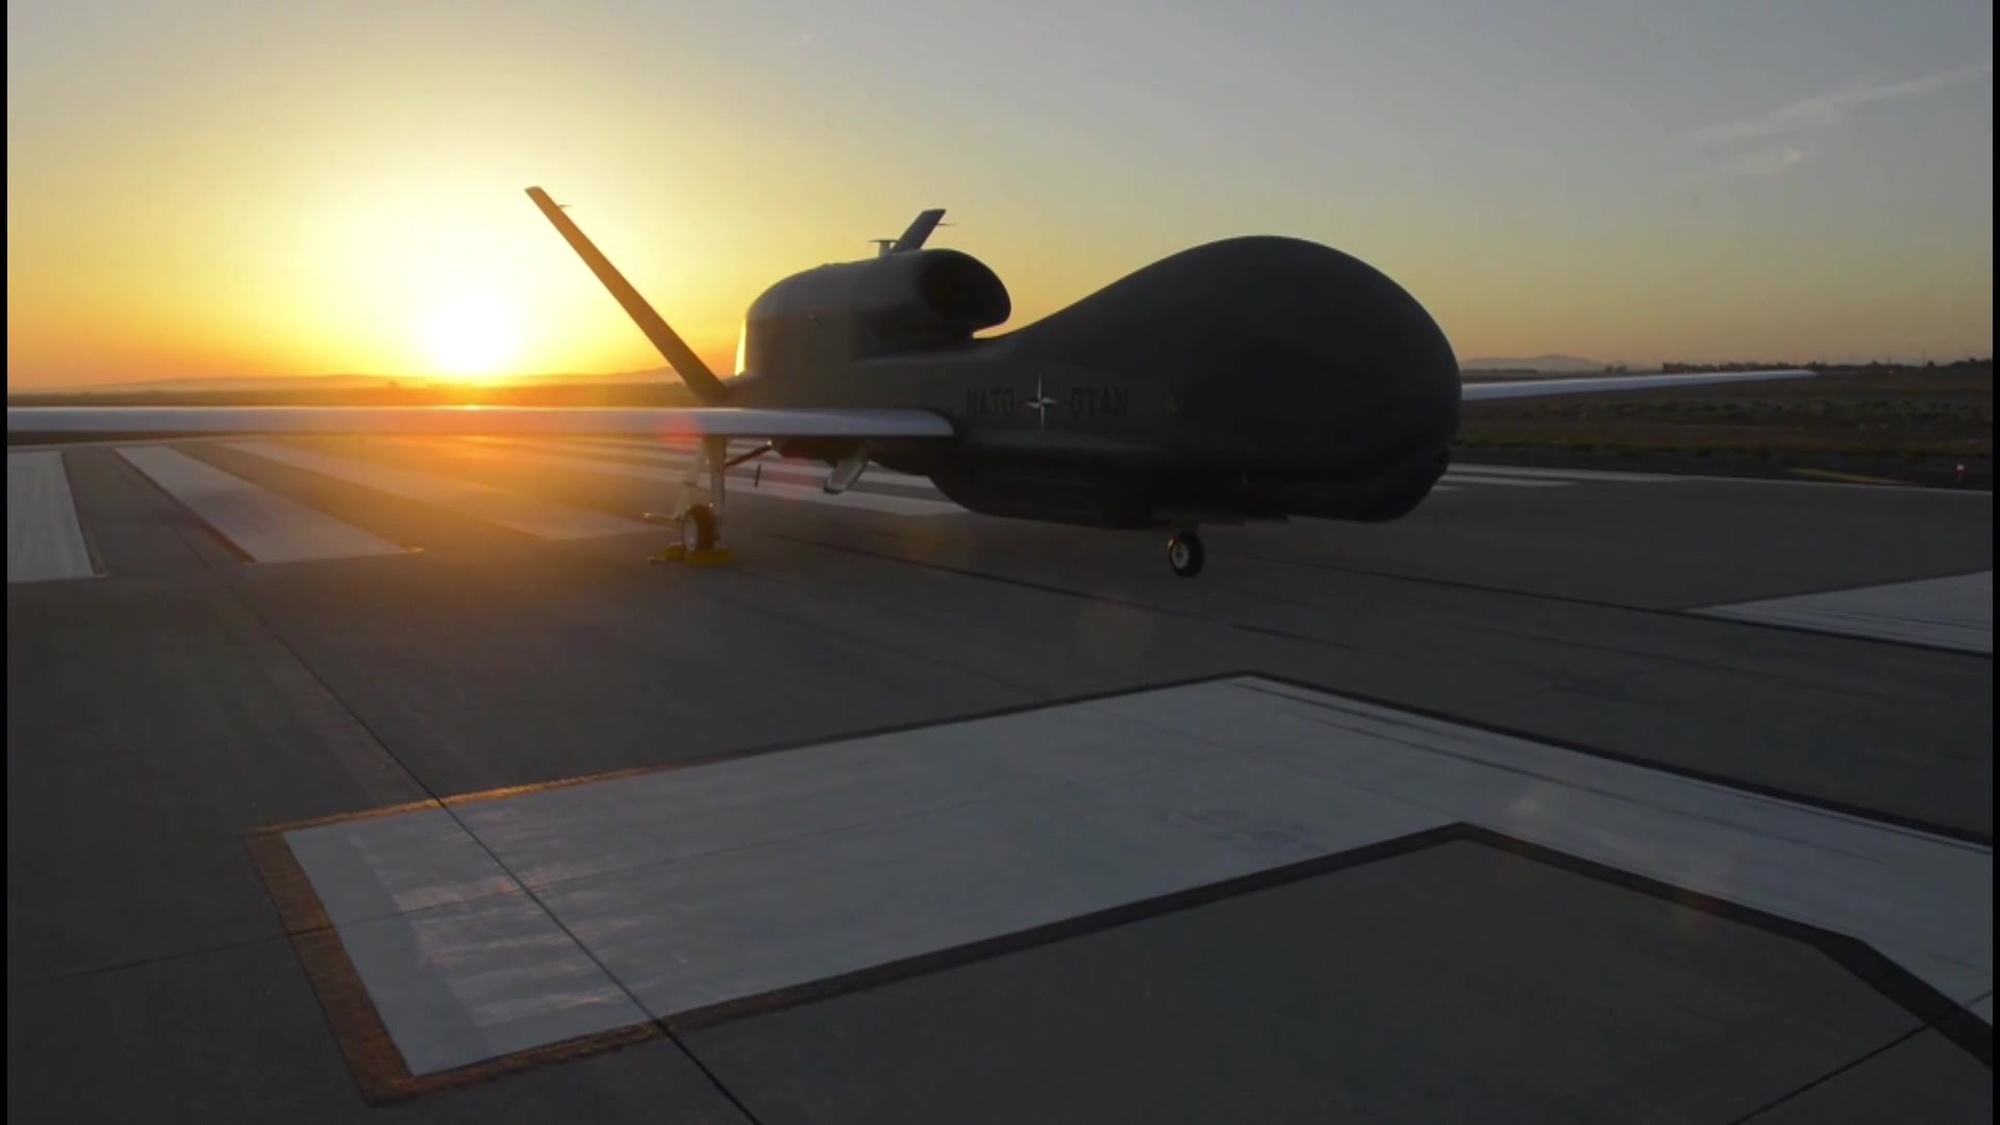 The first of NATO’s five unmanned air vehicles rolled off the factory line in San Diego on Thursday, 4 June 2015.  The Global Hawk Block 40 is part of the Alliance Ground Surveillance Program (AGS).  The NATO-owned and -operated AGS core capability will enable the Alliance to perform persistent surveillance over wide areas from high-altitude long-endurance  aircraft  in any weather or light condition . The system will give commanders a comprehensive picture of the situation on the ground.
The AGS system is being acquired by 15 Allies (Bulgaria, Czech Republic, Denmark, Estonia, Germany, Italy, Latvia, Lithuania, Luxembourg, Norway, Poland, Romania, Slovakia, Slovenia and the United States). AGS is scheduled to reach initial operational capability by the end of 2017. The air vehicles will be controlled from the main operating centre in Sigonella, Italy.